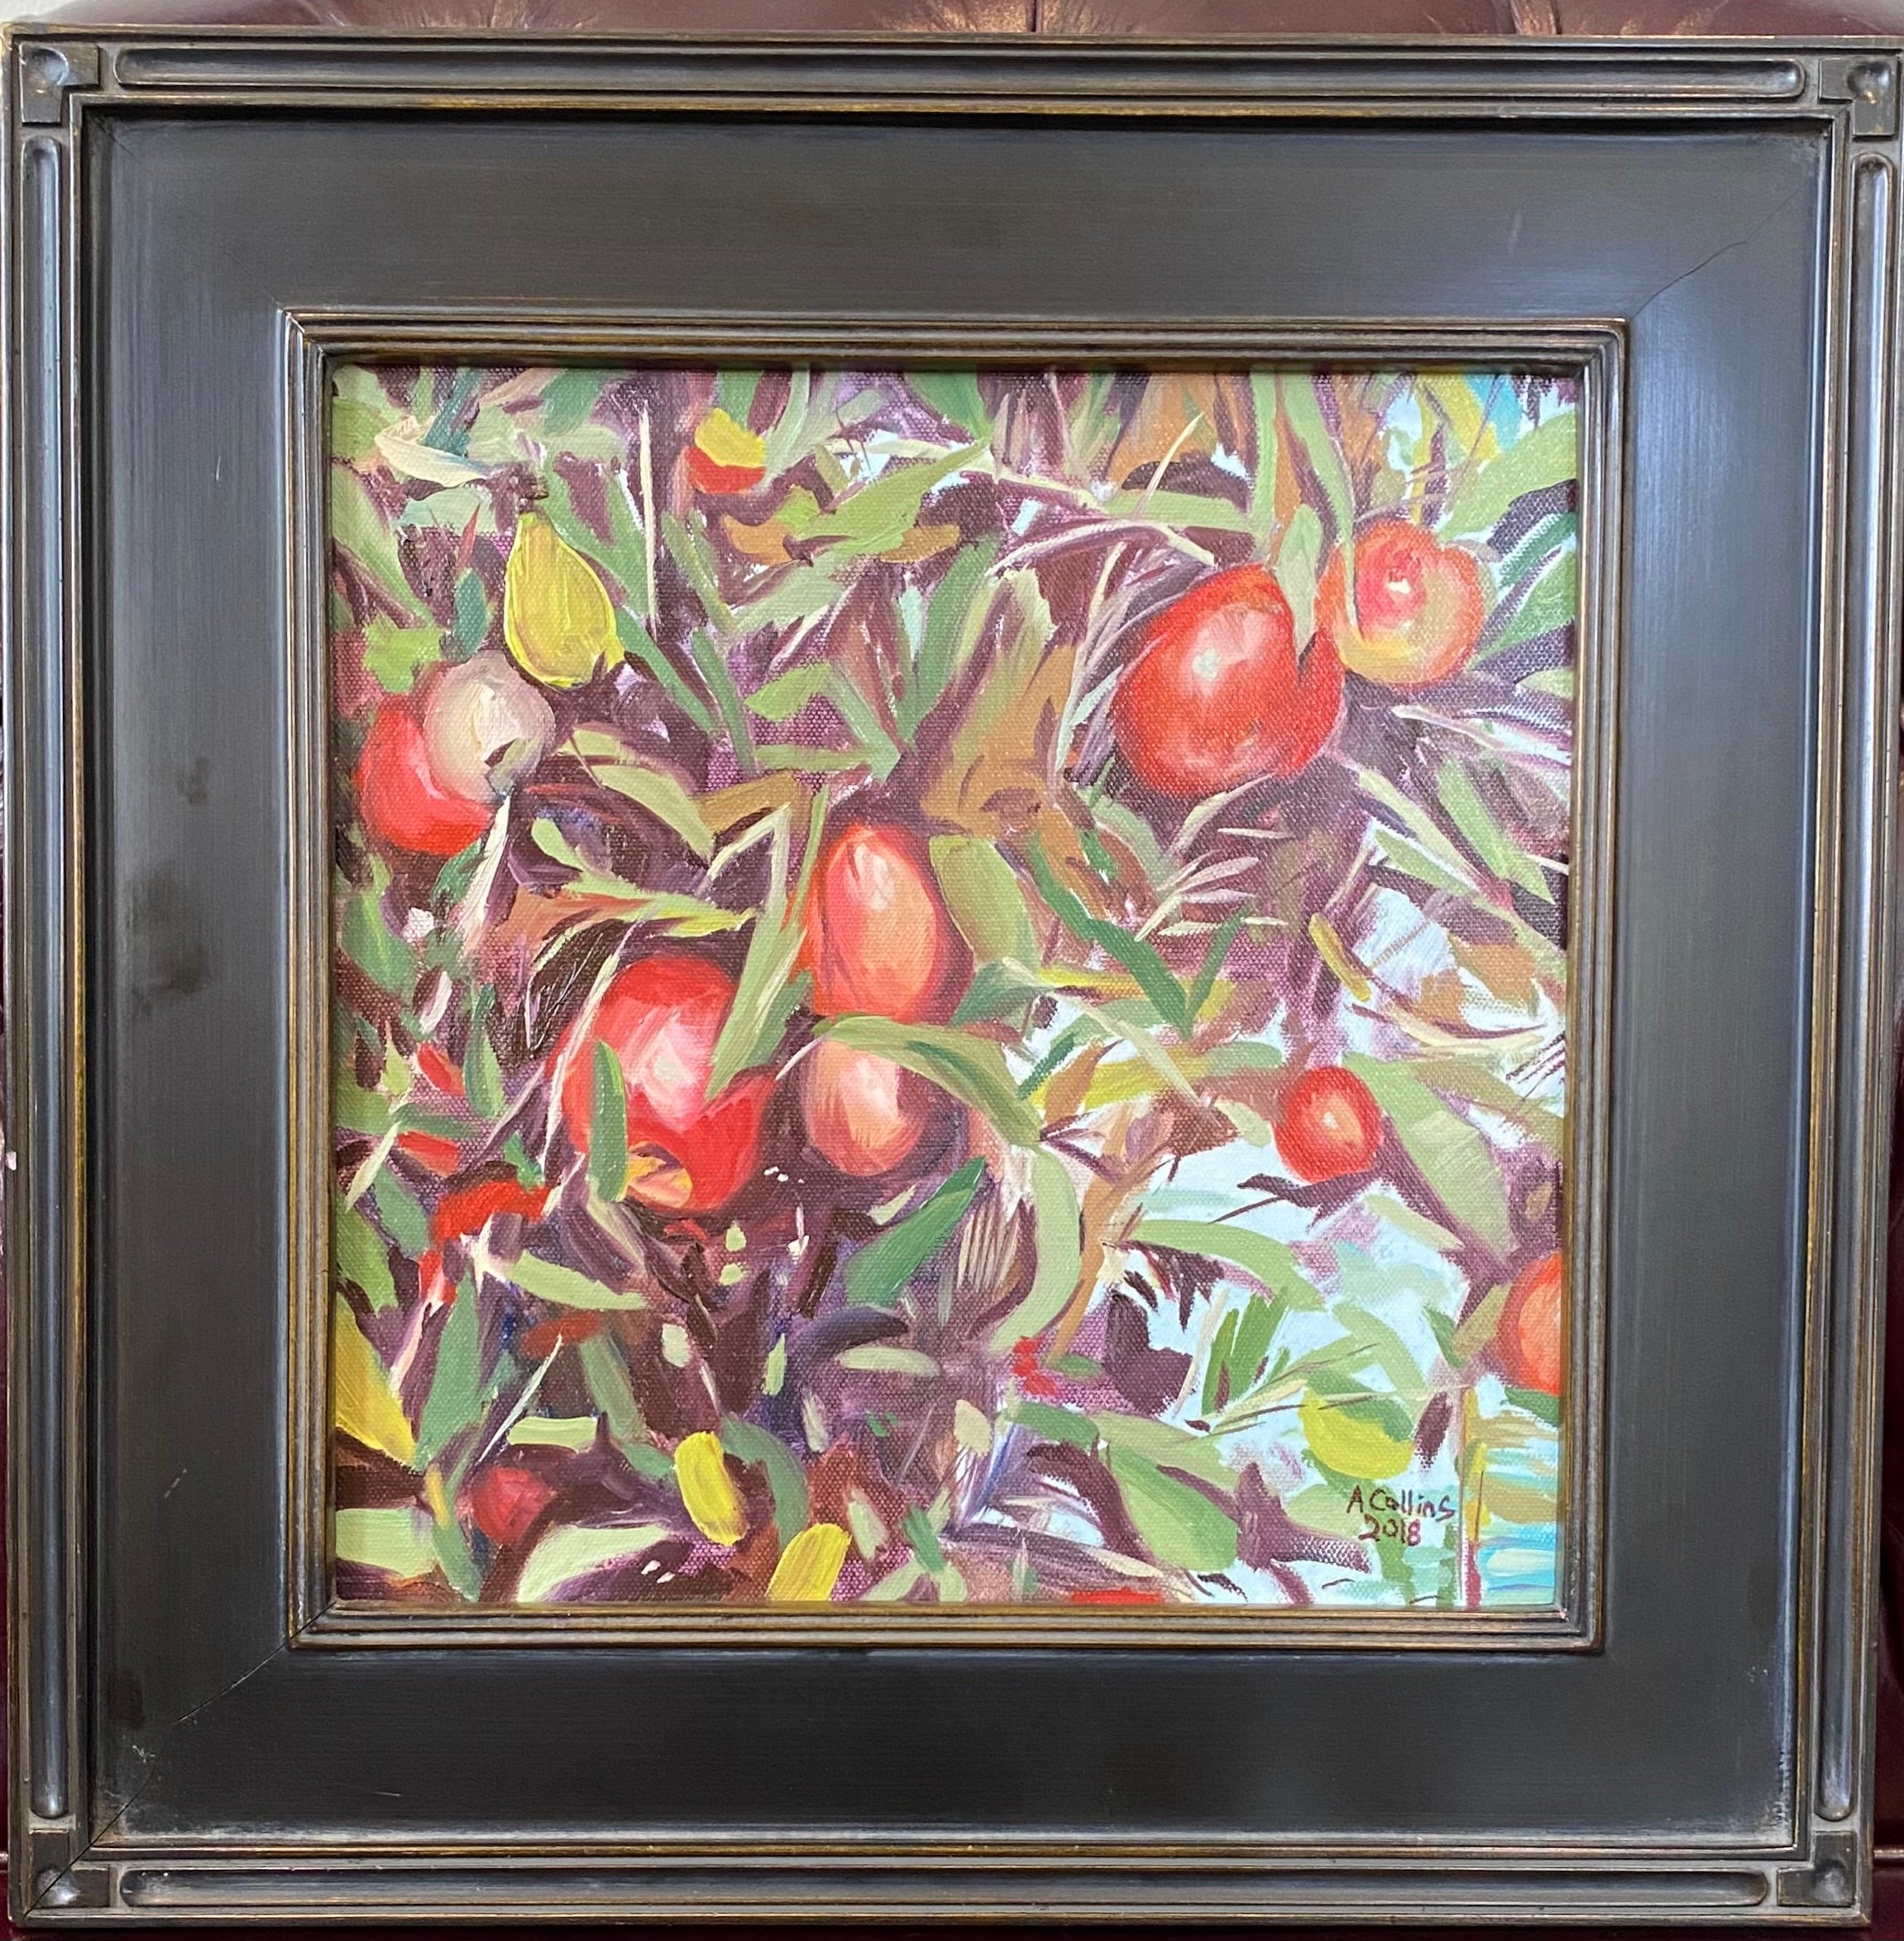 Apples Abstraction
Oil	
12” X 12”
$295
.
